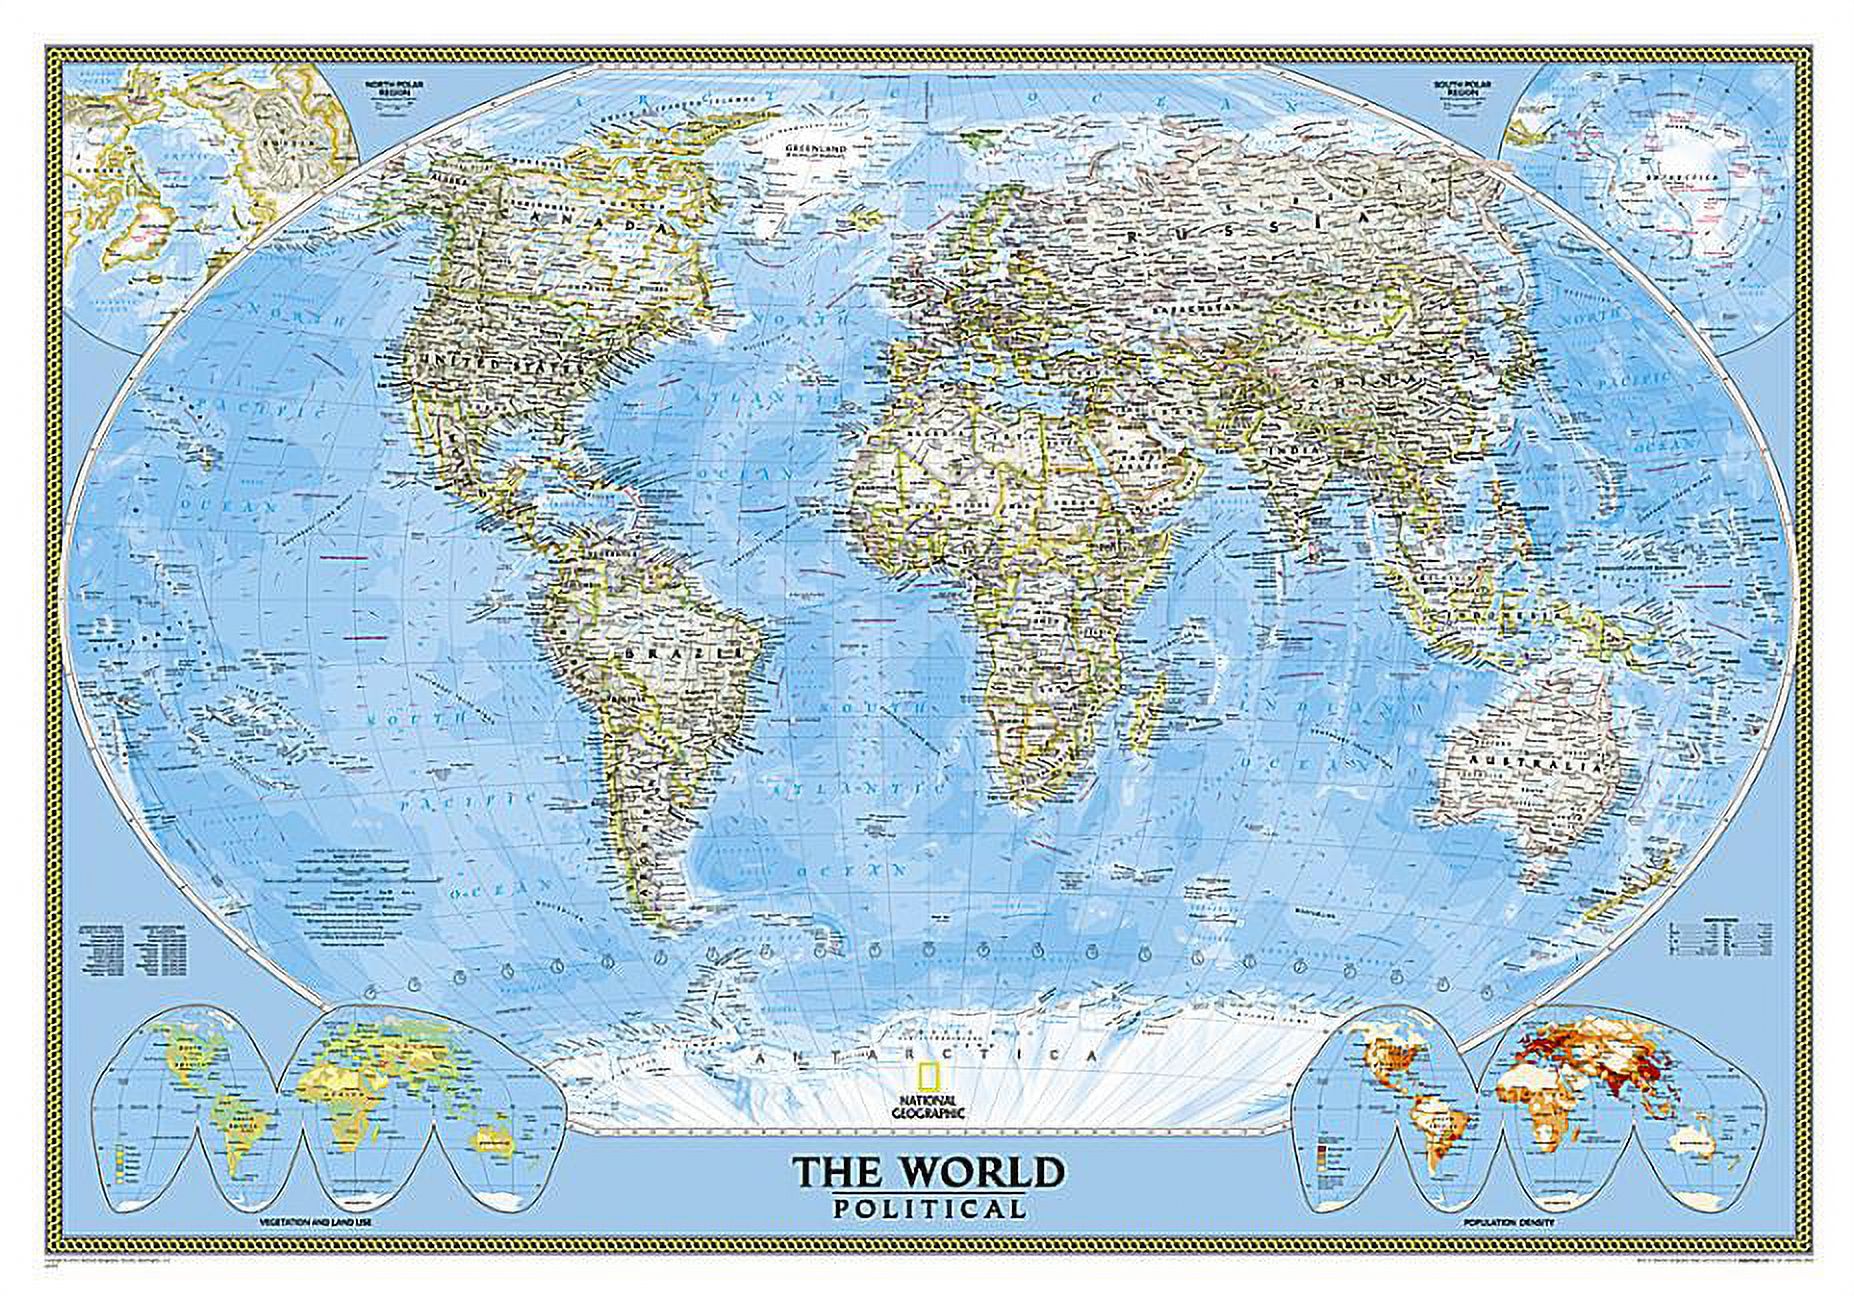 National geographic: world classic wall map - laminated (43.5 x 30.5 inches) (other): 9780792294535 - image 1 of 1